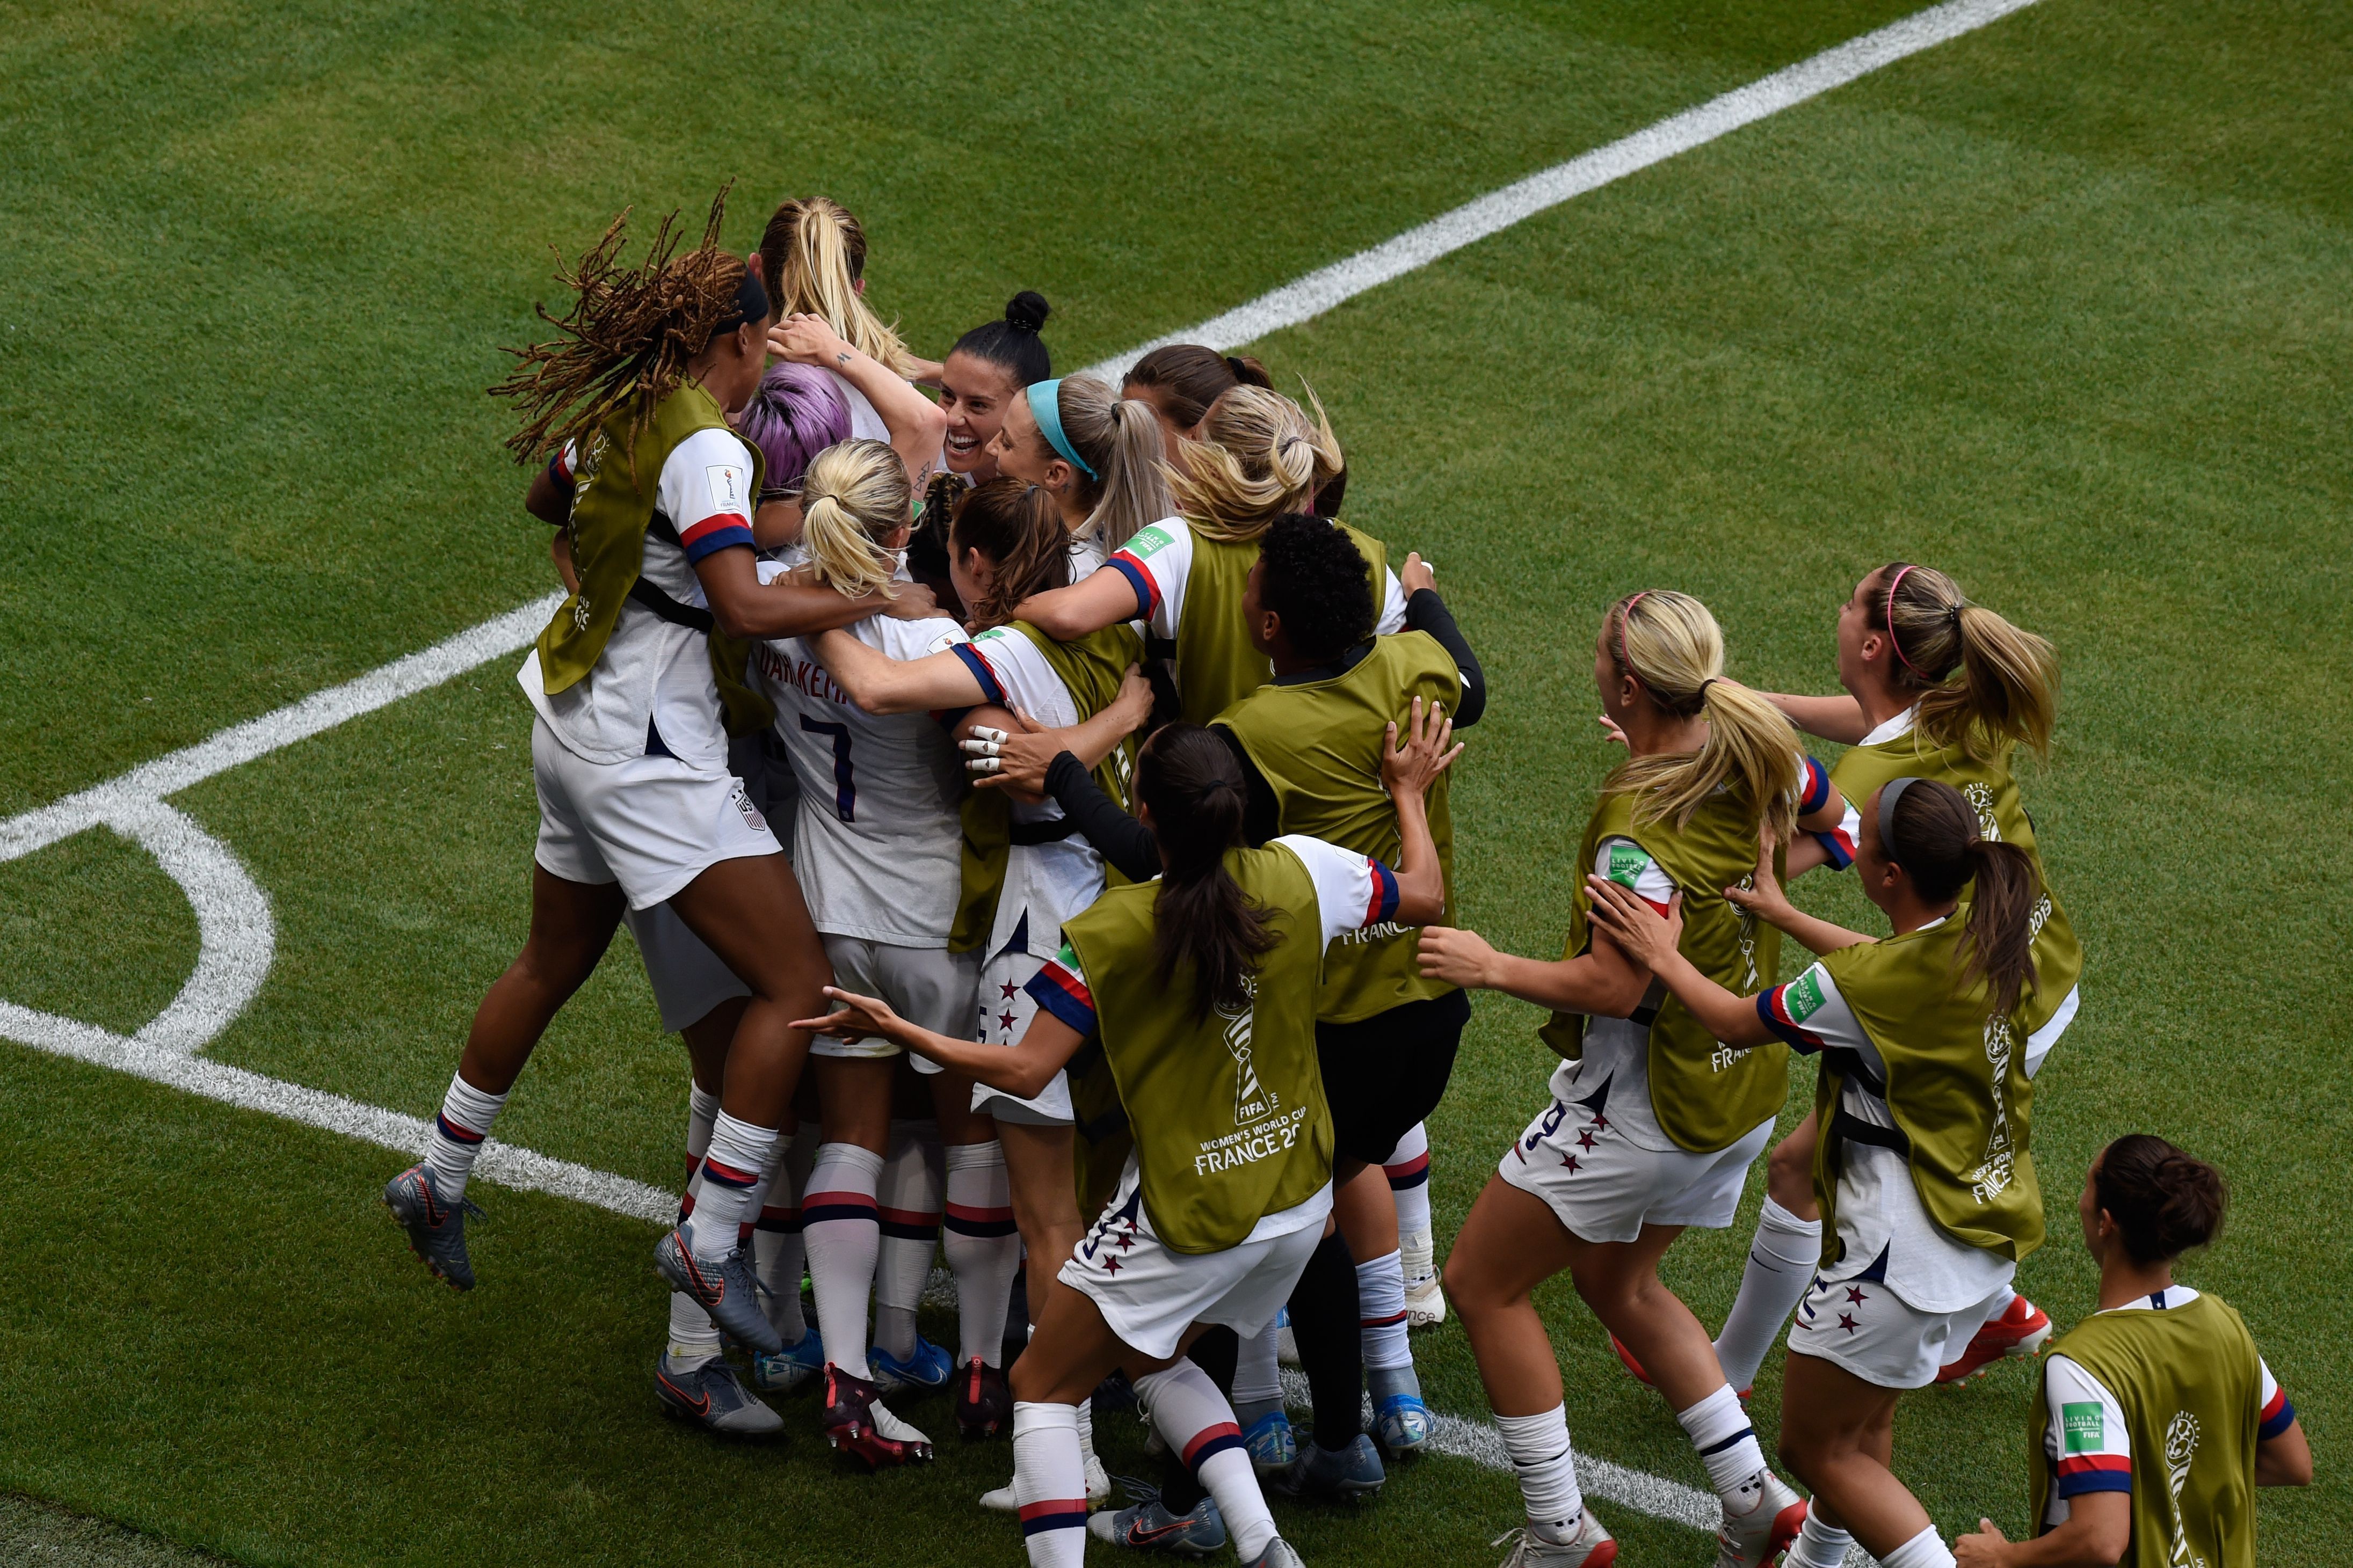 United States' forward Megan Rapinoe is swamped by her teammates after scoring from the penalty spot.